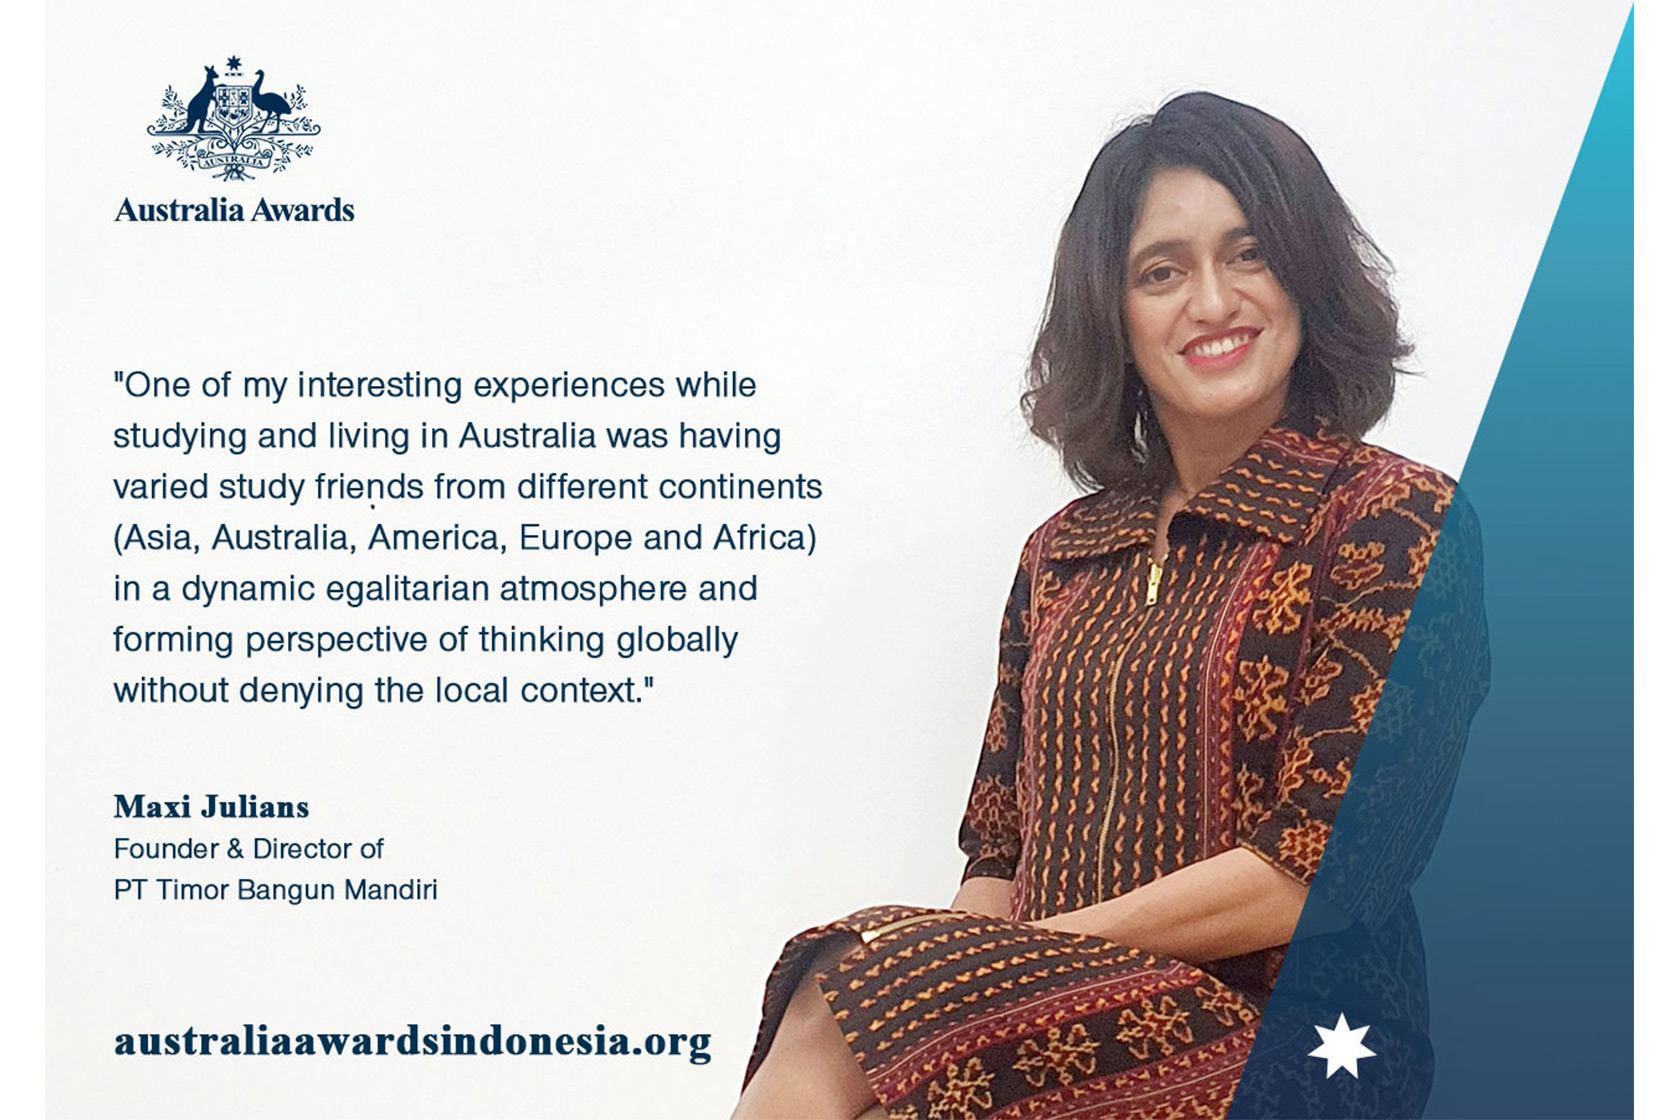 A testimonial from Maxi Julians about her experience studying and living in Australia